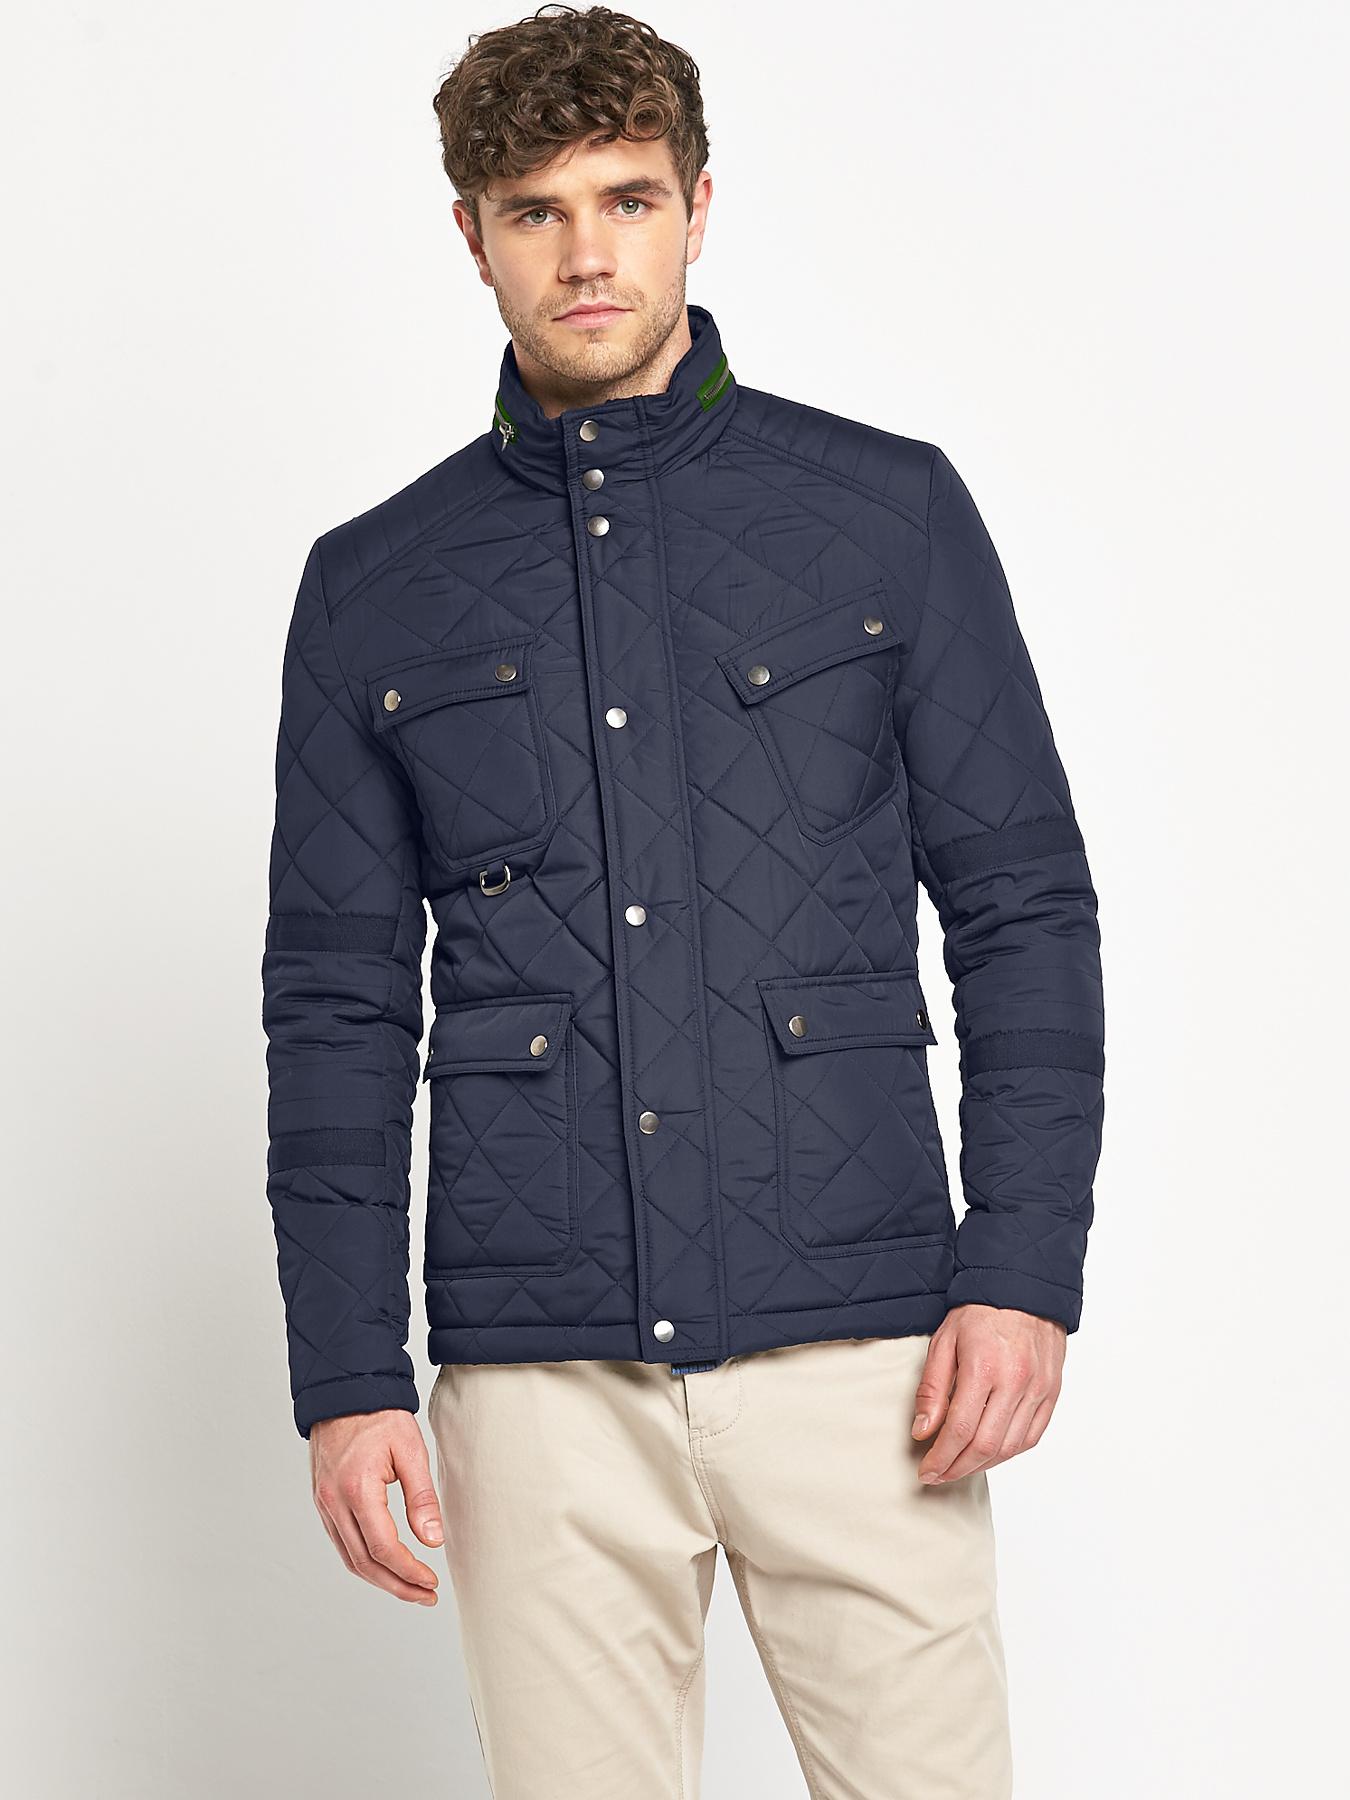 Littlewoods - Mens Quilted Jacket, Navy - Special Savings Today at ...